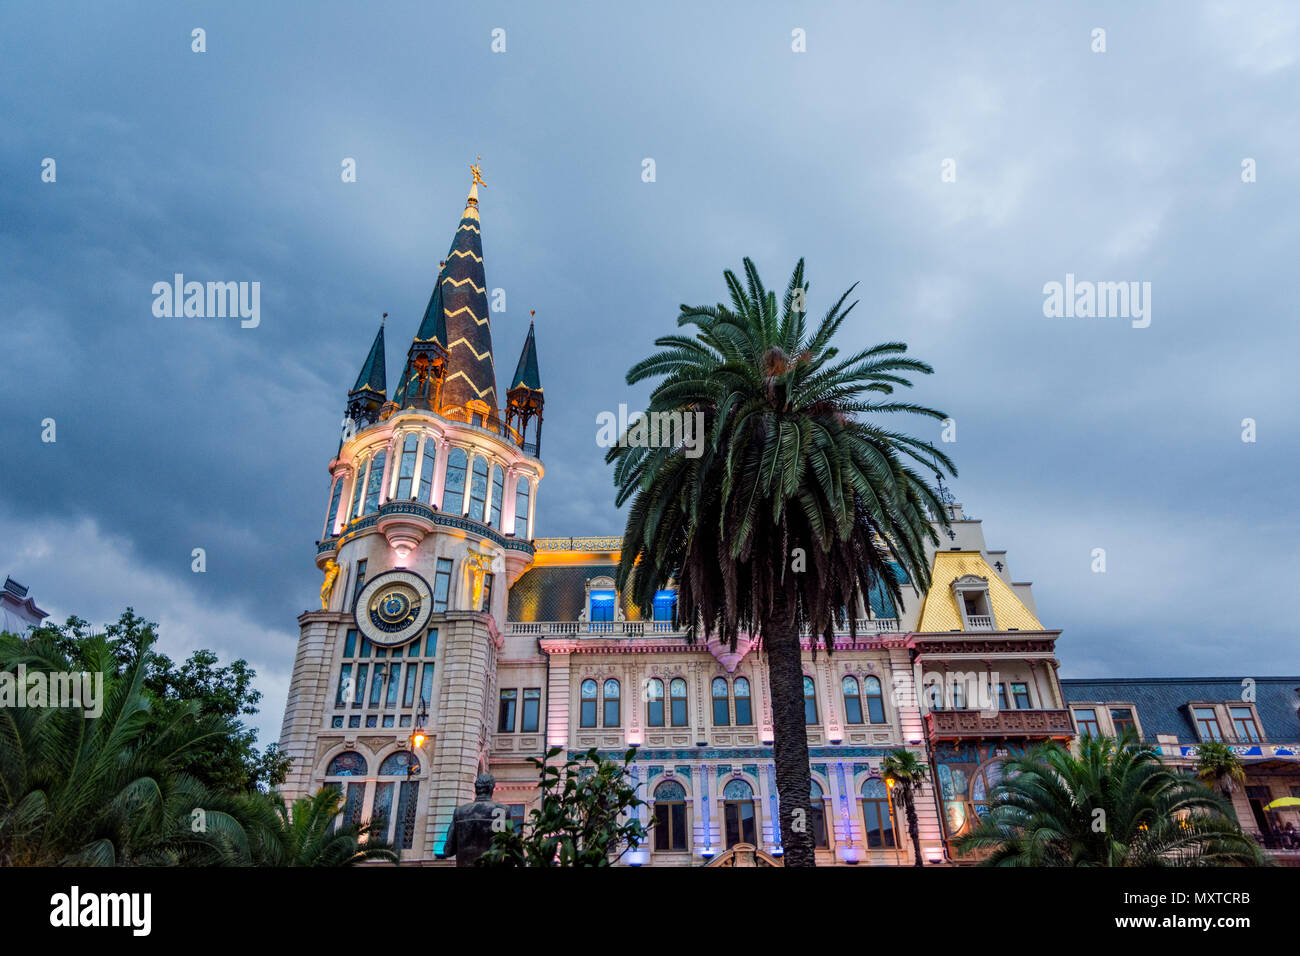 Batumi, Georgia - August 25, 2017: Astronomical clock tower, on the restored facade of the former National Bank building in Europe park Stock Photo